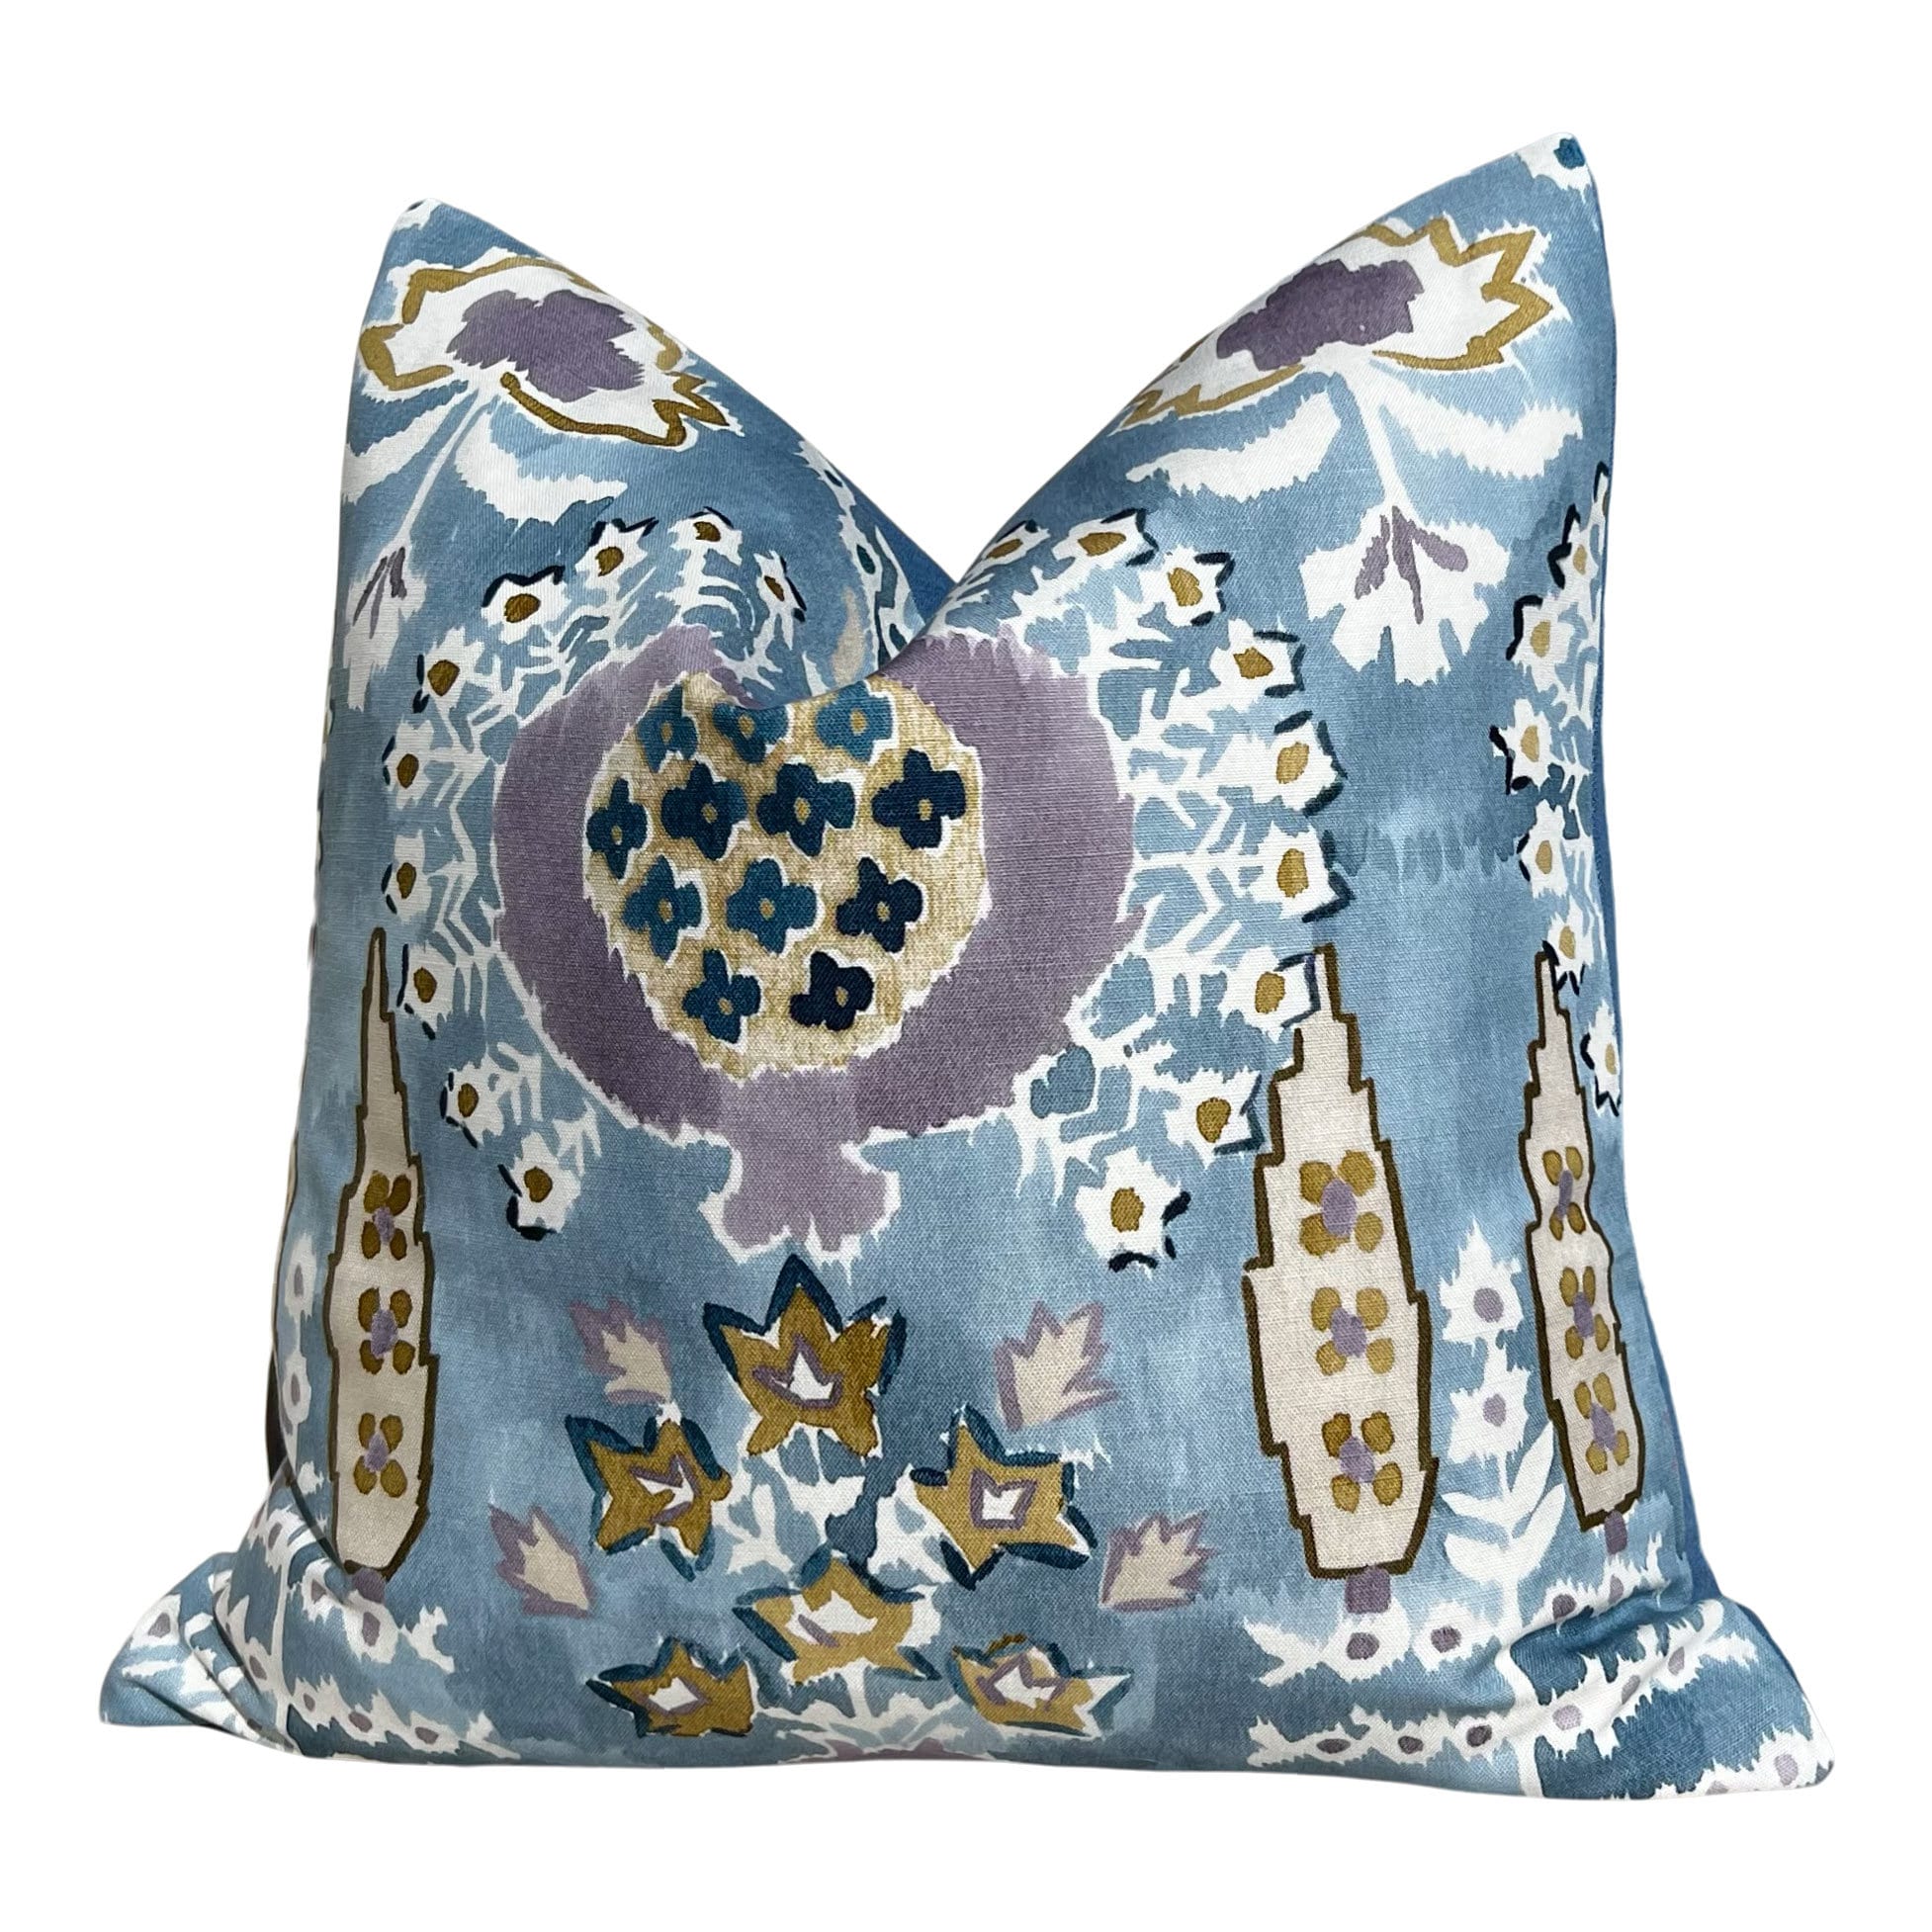 Thibaut Mendoza Suzani French Blue and Lavender. High End Pillow Covers, Designer Navy Pillow, Medallion Euro Sham Covers, Lumbar Pillows